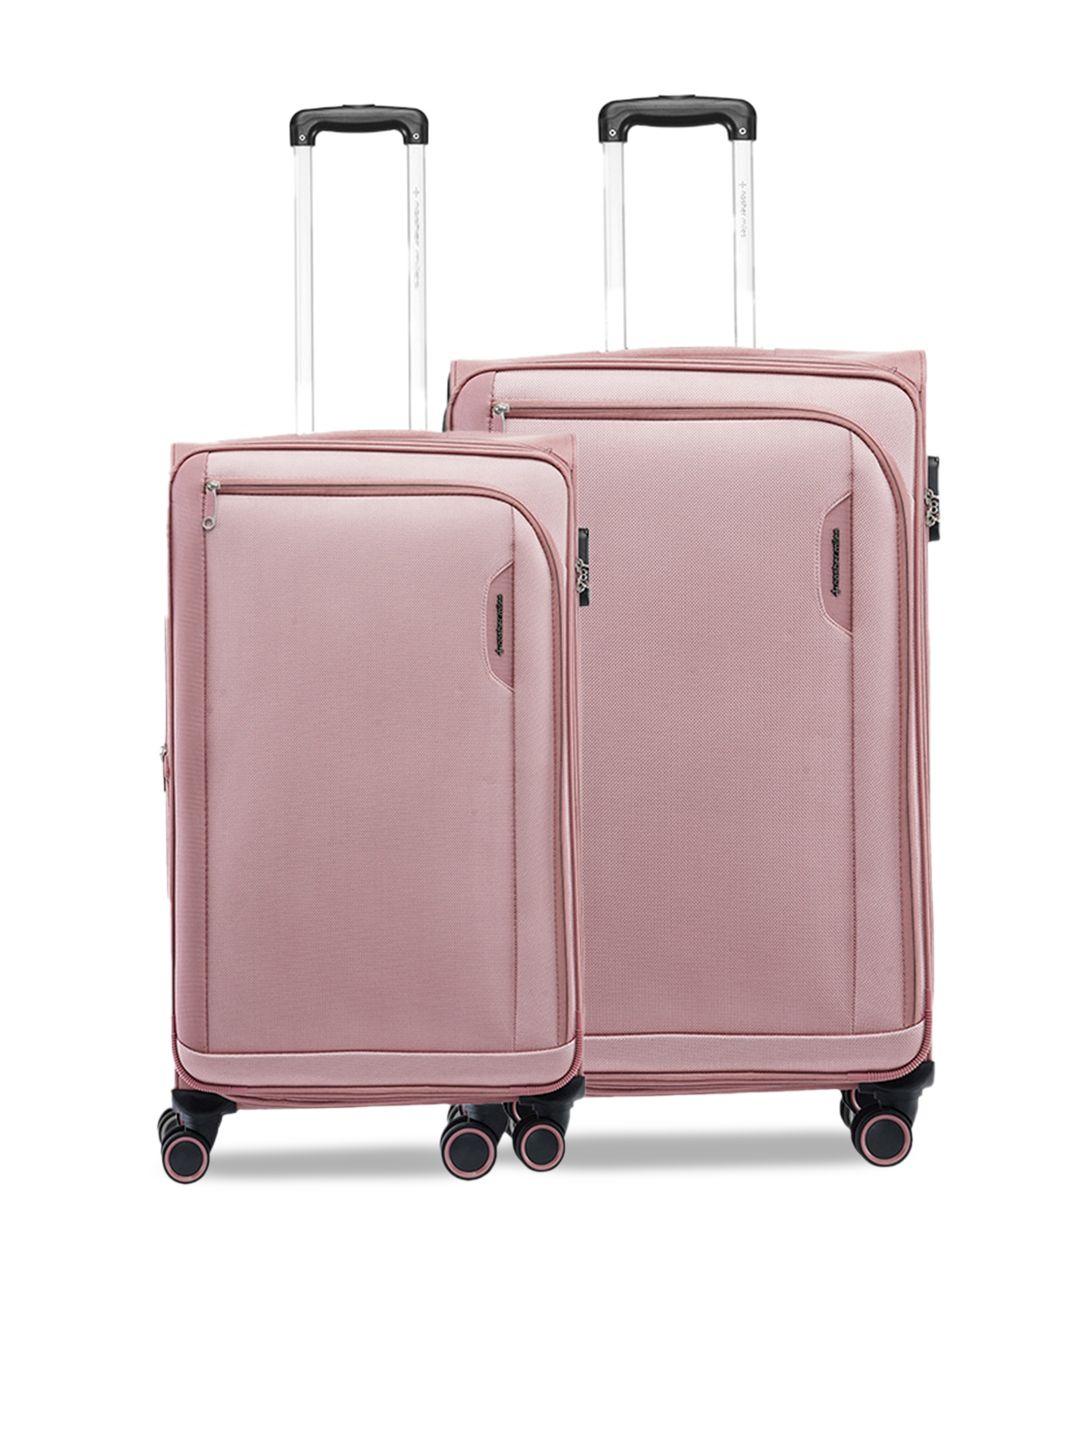 nasher miles dallas expander set of 2 pink soft-sided travel trolley suitcase